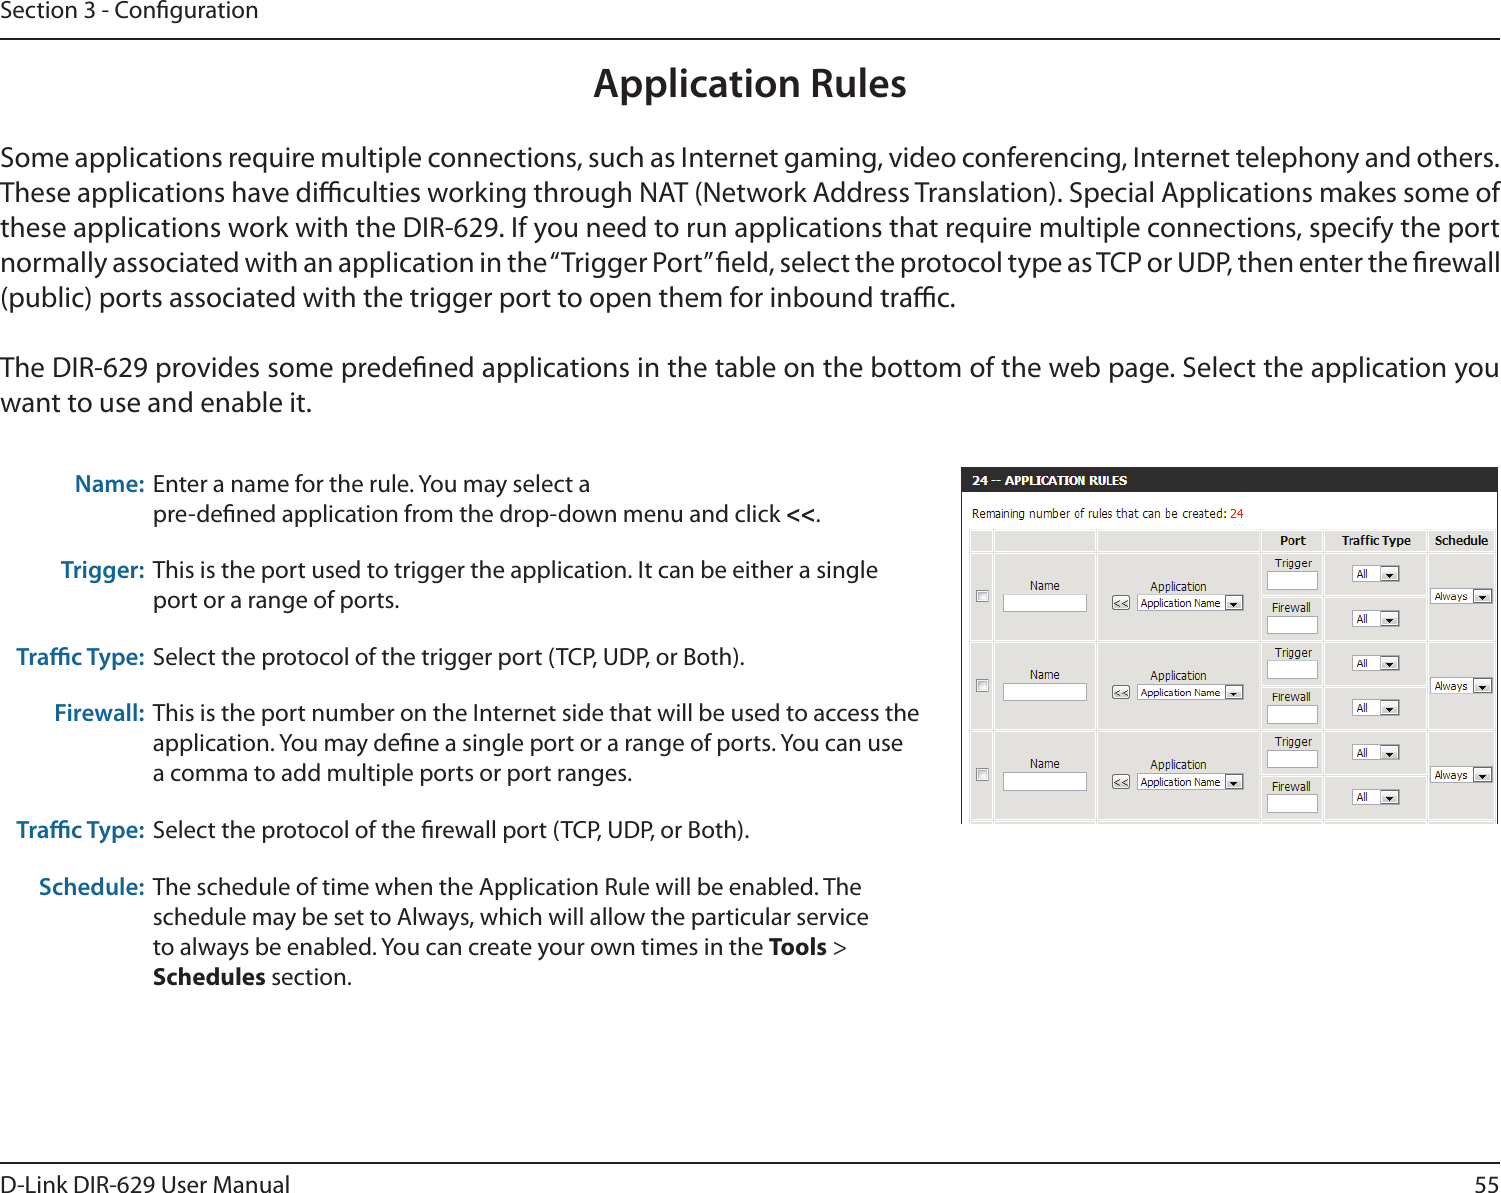 55D-Link DIR-629 User ManualSection 3 - CongurationApplication RulesThese applications have diculties working through NAT (Network Address Translation). Special Applications makes some of normally associated with an application in the “Trigger Port” eld, select the protocol type as TCP or UDP, then enter the rewall (public) ports associated with the trigger port to open them for inbound trac.want to use and enable it.Name:  pre-dened application from the drop-down menu and click &lt;&lt;.Trigger: This is the port used to trigger the application. It can be either a single port or a range of ports.Trac Type: Firewall: This is the port number on the Internet side that will be used to access the a comma to add multiple ports or port ranges.Trac Type: Schedule: schedule may be set to Always, which will allow the particular service Tools &gt; Schedules section.